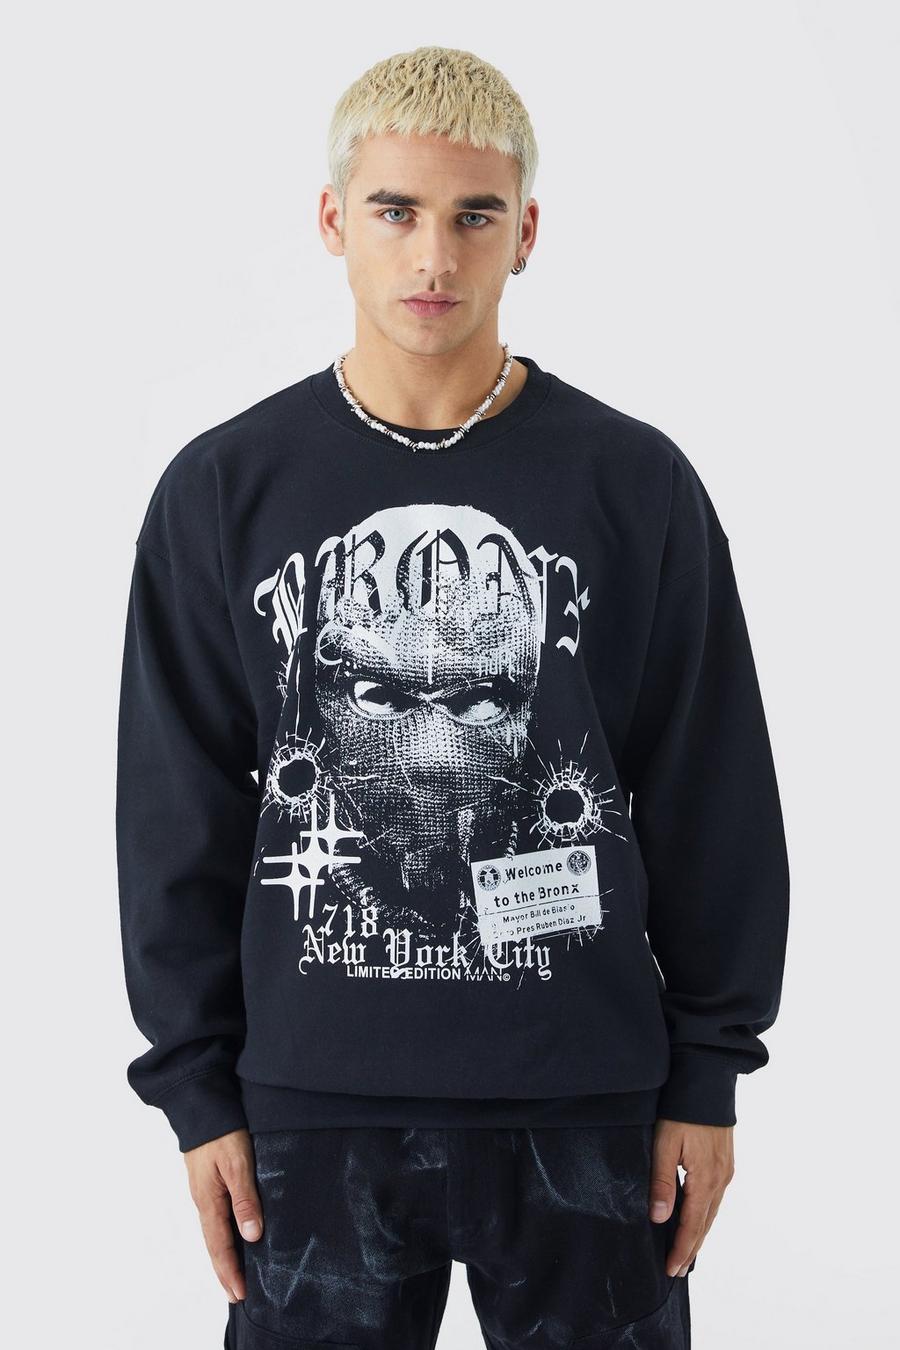 Relaxed Fit Printed Sweatshirt - White/NYC - Men